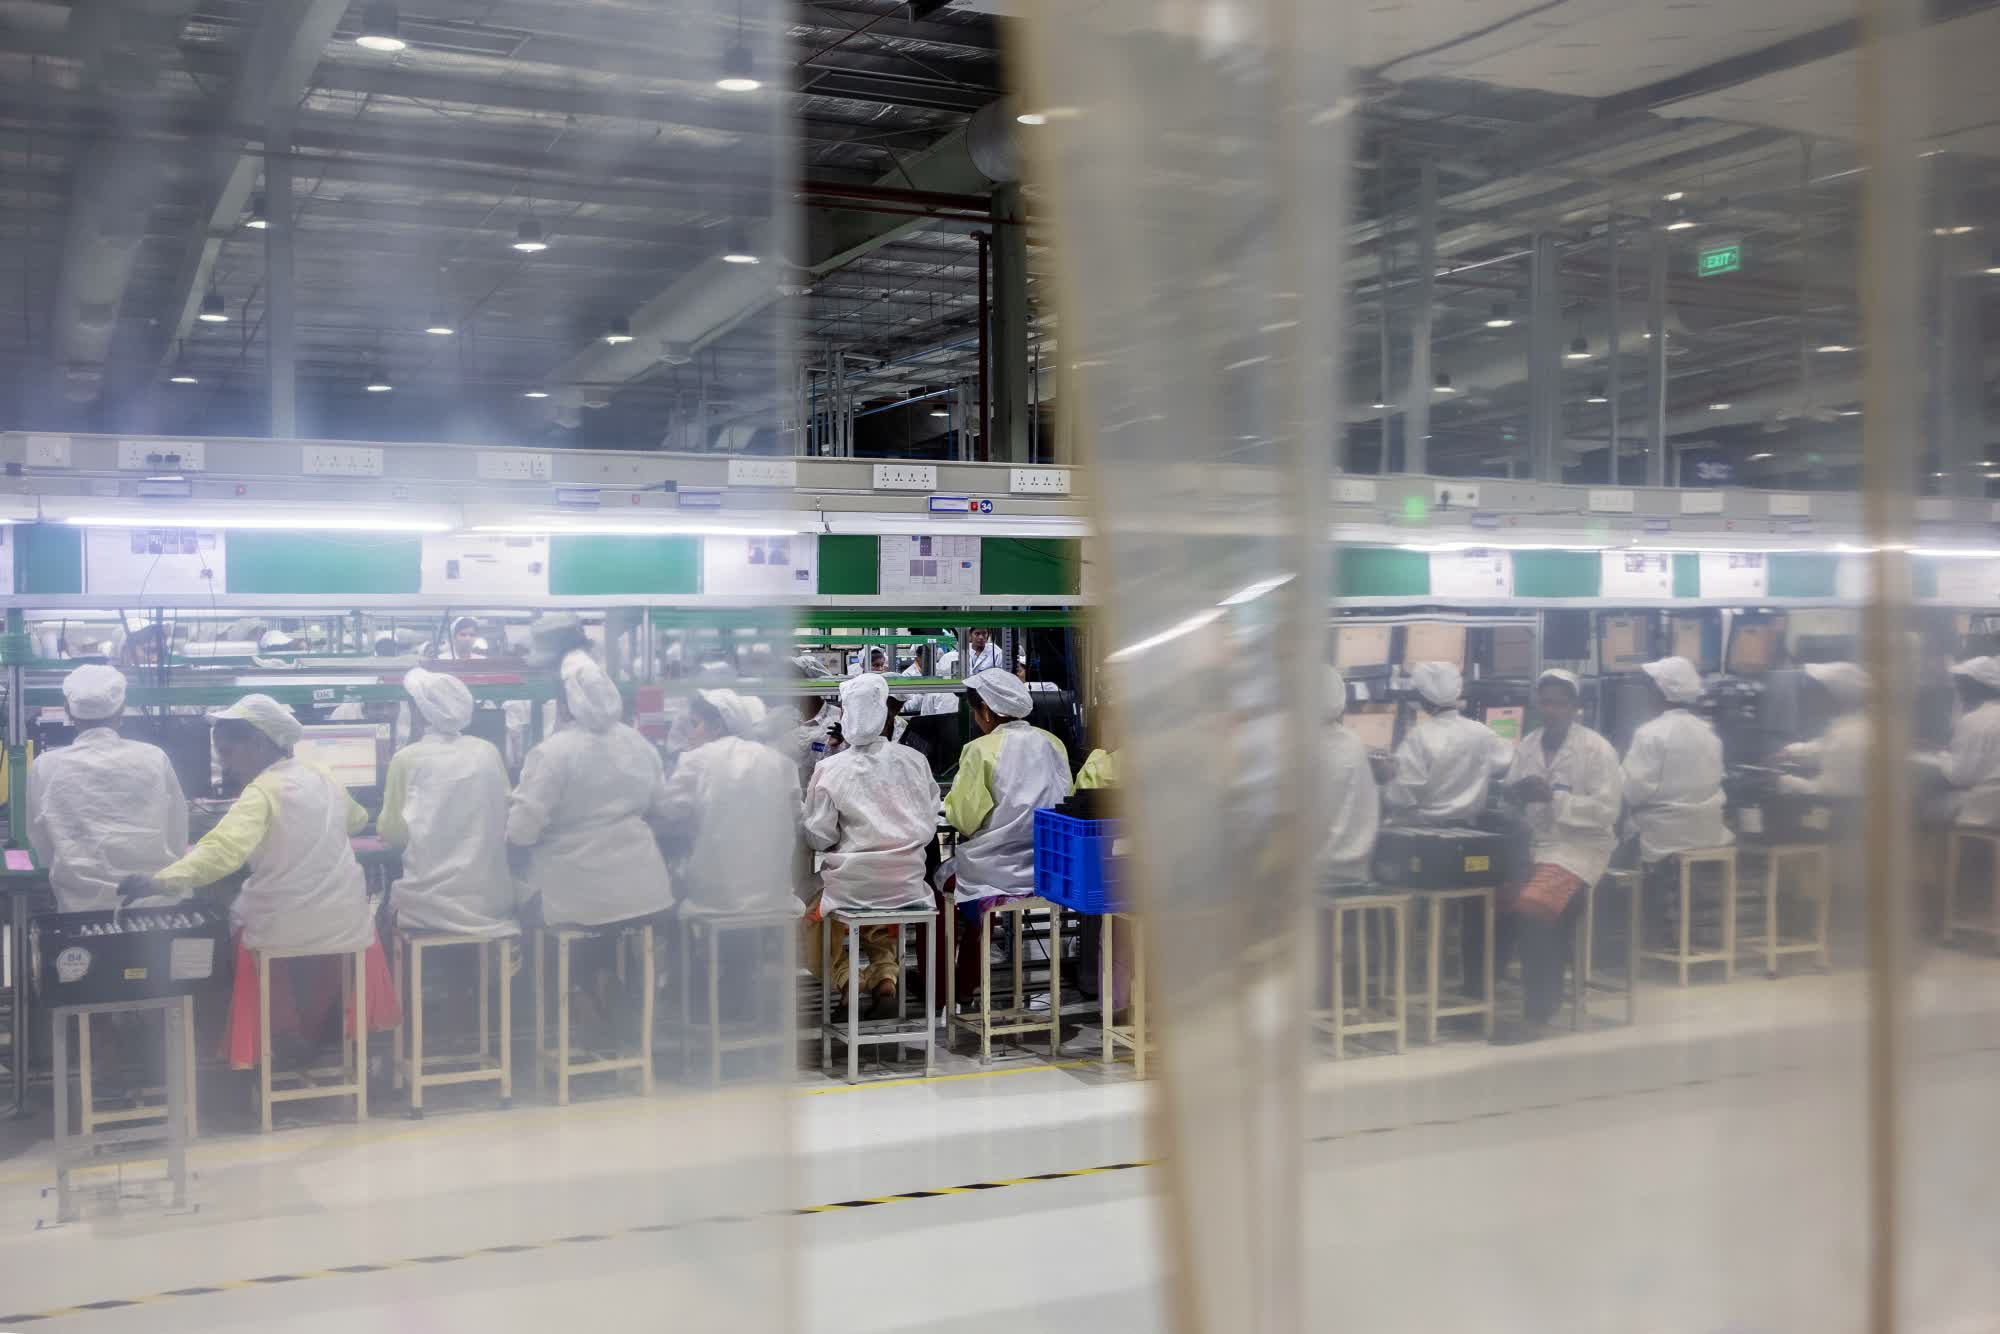 An Indian state changed its labor laws to support iPhone manufacturing